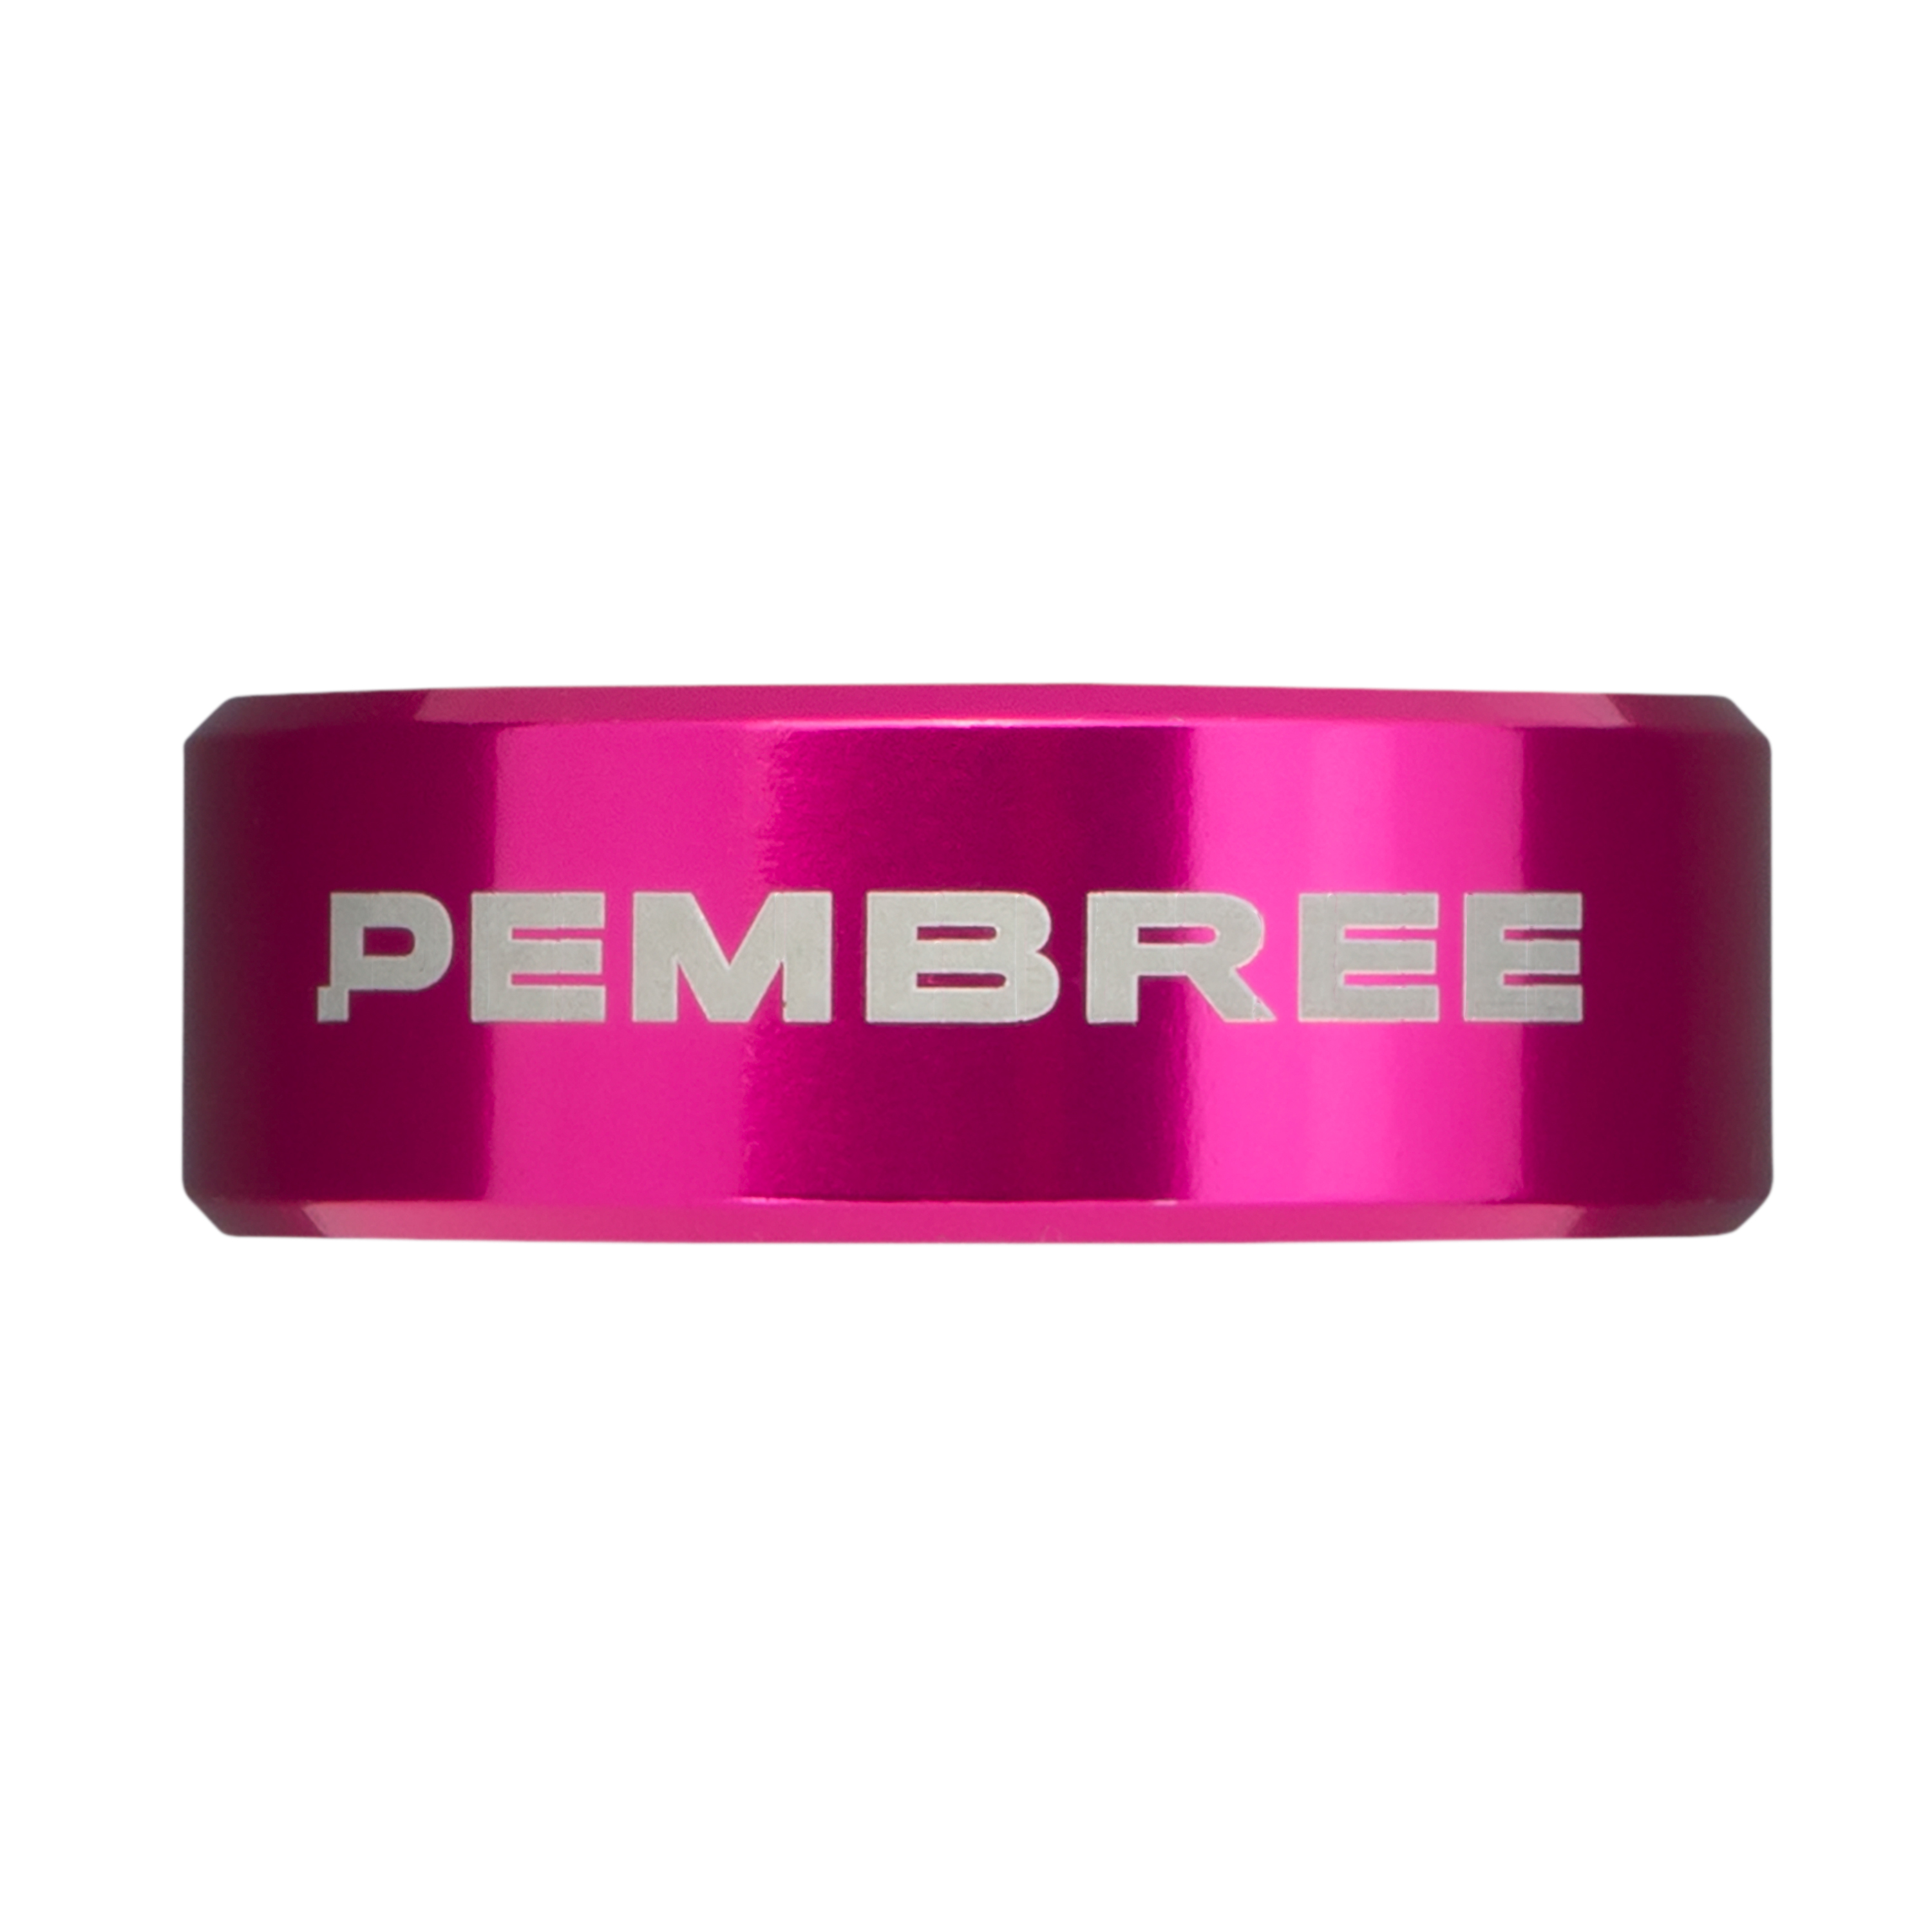 PEMBREE-DBN-Seat-Post-Clamp-Pink-Front.jpg